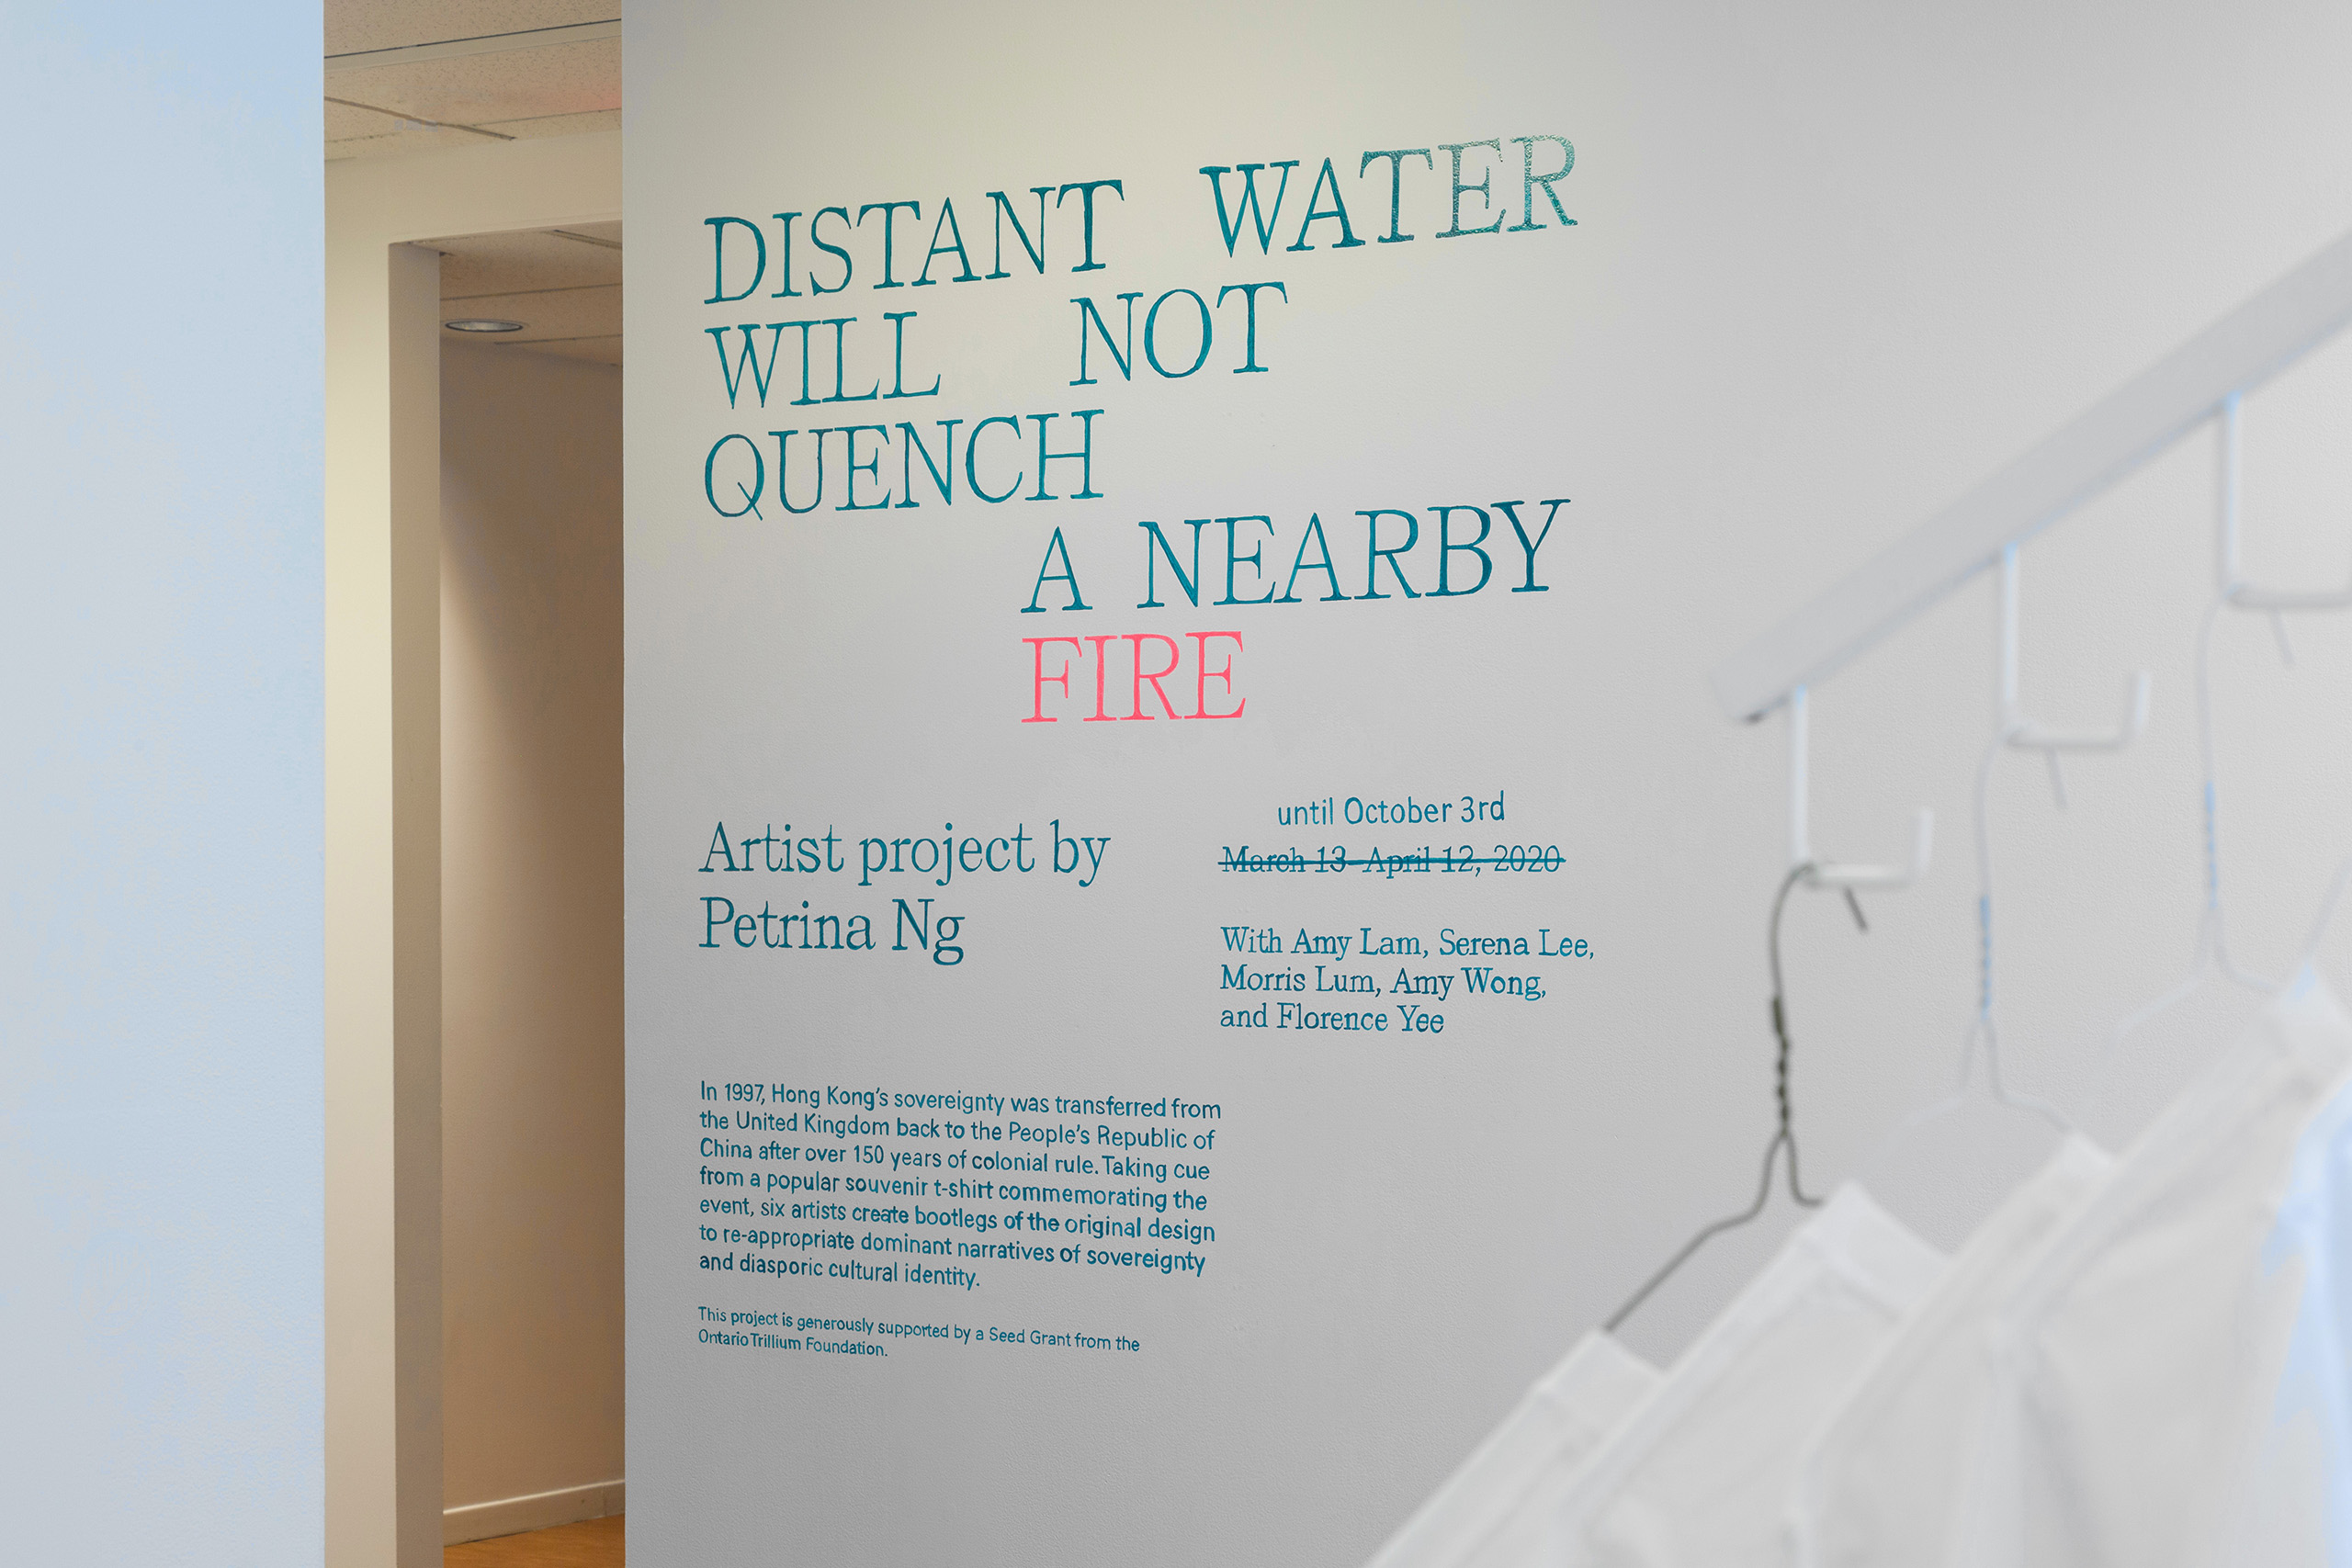 Exhibition intro text painted in teal and pink on a white wall. The edge of hanging t-shirts is visible in the bottom right